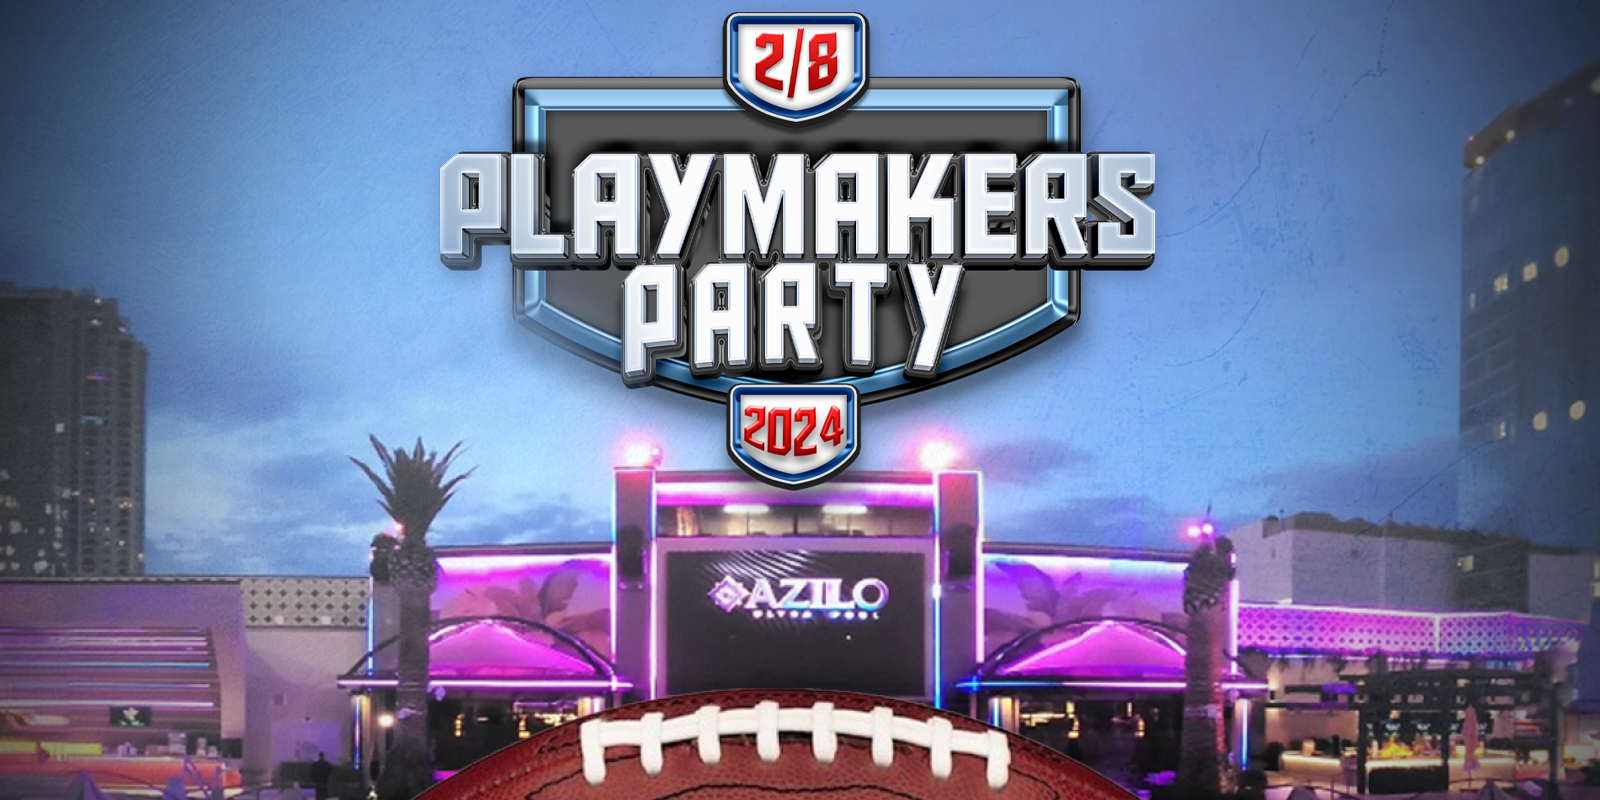 Playmakers Party 2024 - Thursday, February 8 at AZILO Ultra Lounge